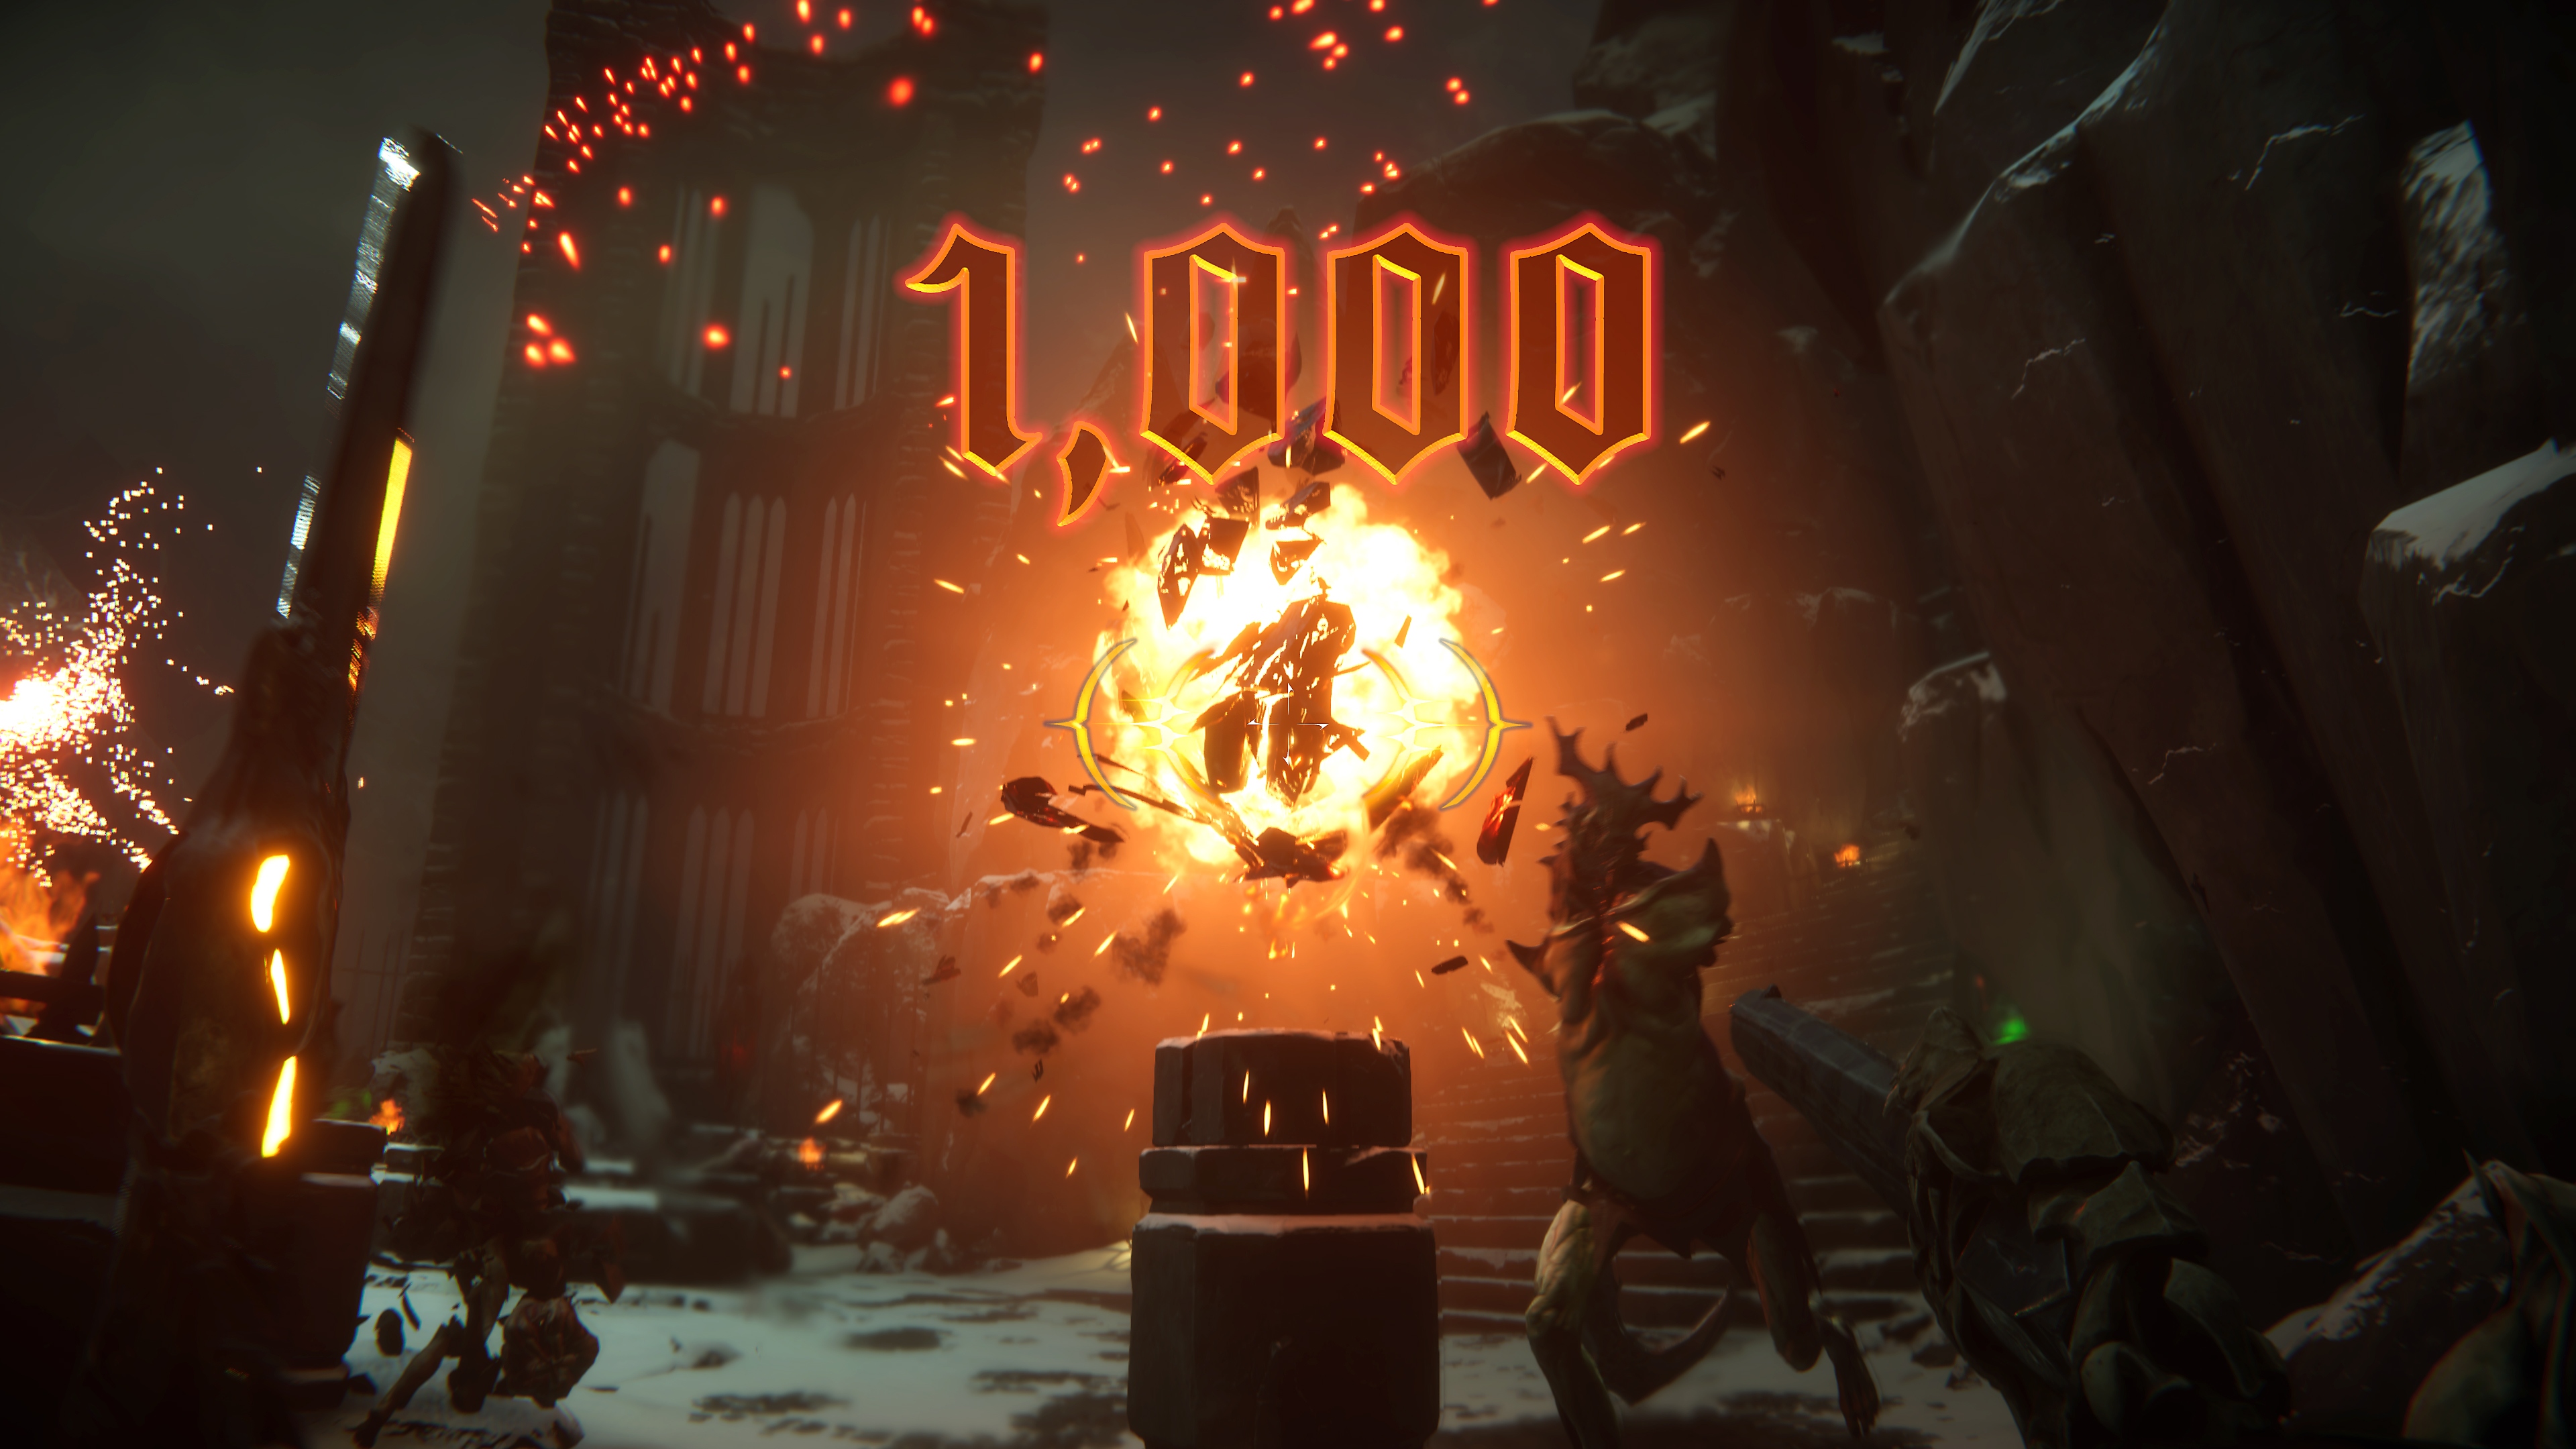 Metal Hellsinger screenshot featuring a large explosion in the centre and a '1000' point score on the screen.